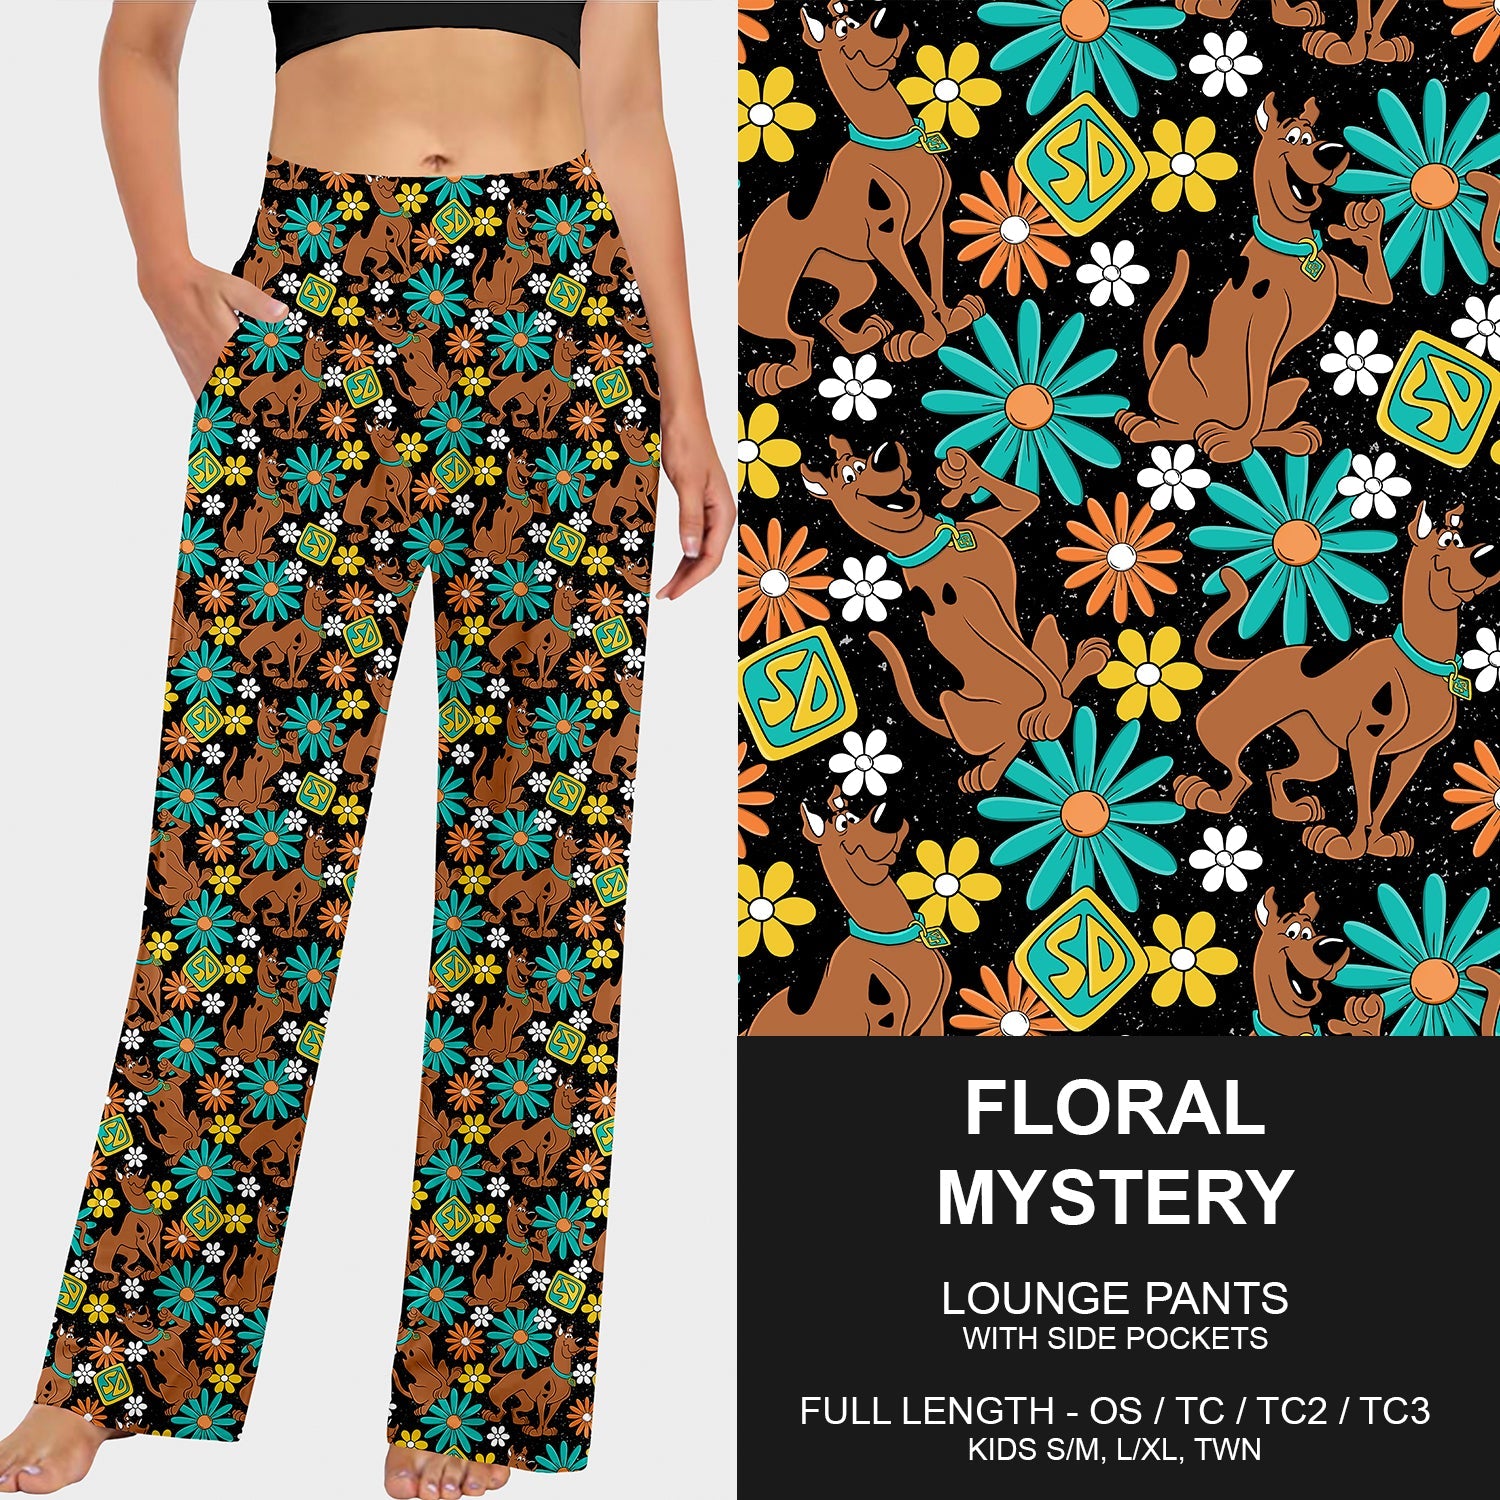 B164 - Preorder Floral Mystery Lounge Pants (Closes 7/07. ETA early Sept)